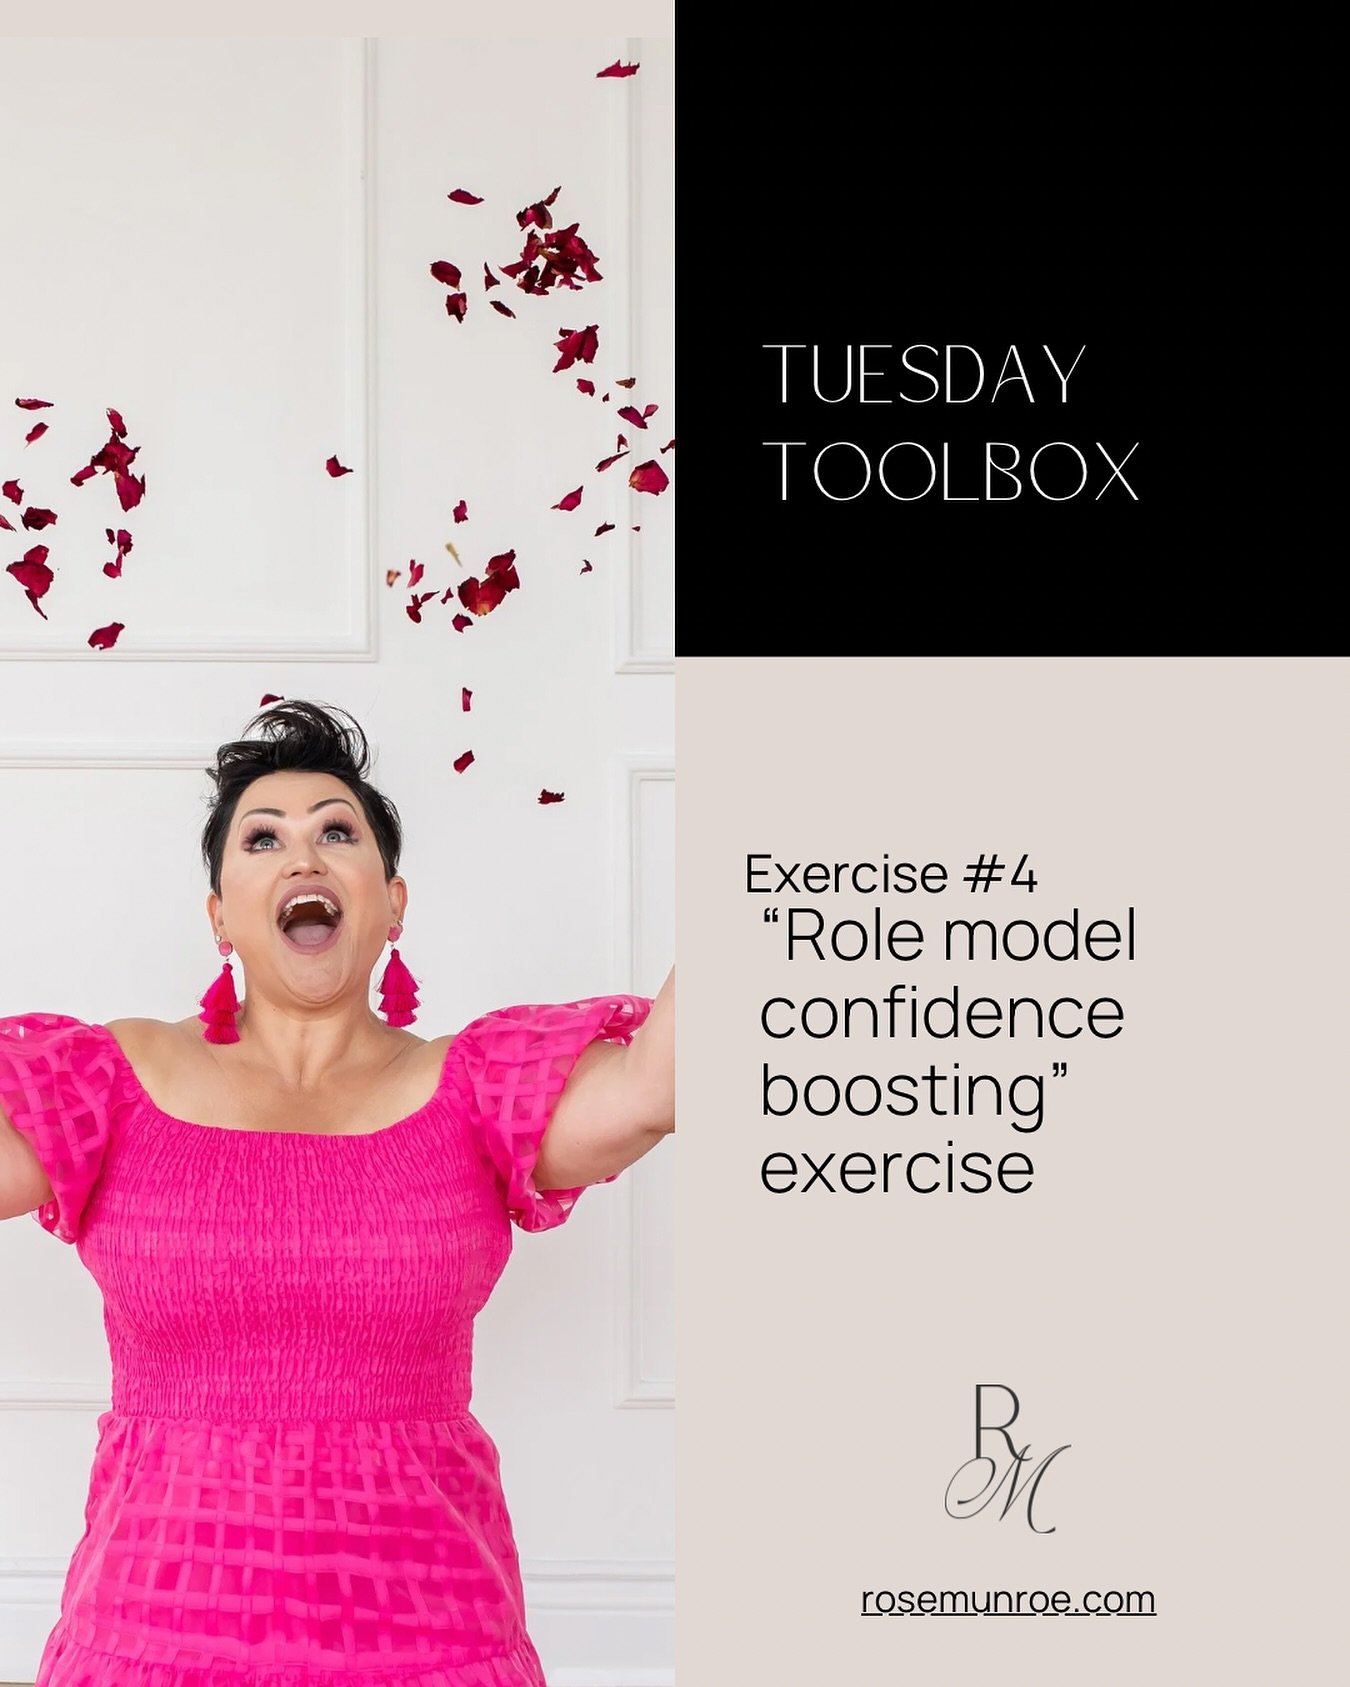 🛠️&nbsp;**Tuesday Toolbox**&nbsp;🛠️

Welcome to my Tuesday Toolbox! 🧰

Introducing tool #4- &ldquo;Role Model Confidence Boosting&rdquo; exercise. 💕

This straightforward coaching exercise assists in embodying the personal qualities you admire in